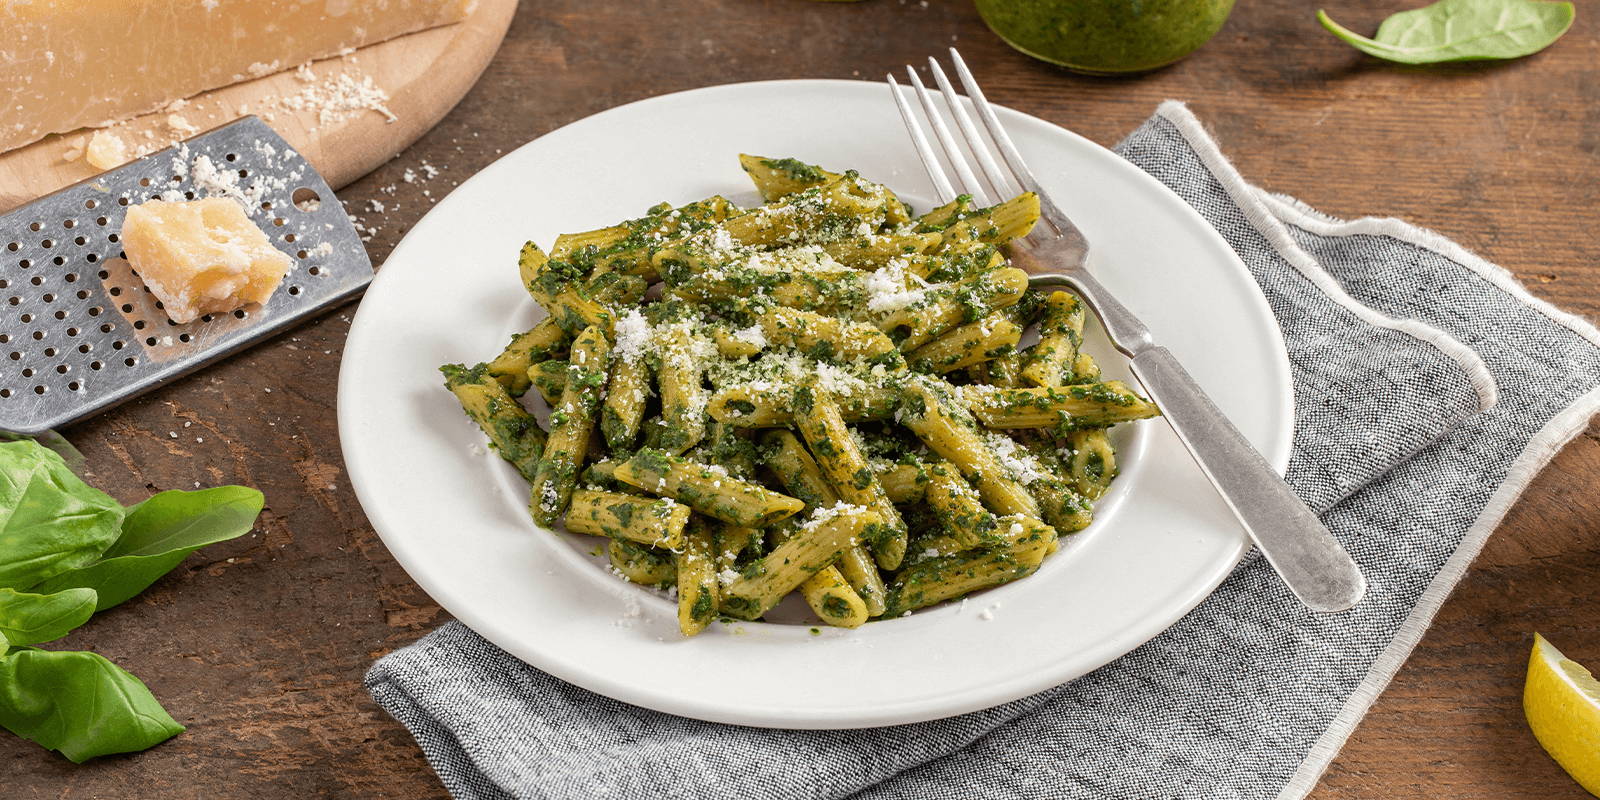 A plateful of Spinach-Basil Pesto With ZENB Penne Pasta atop a wooden table, styled with parmesan, basil leaves, and lemon slices.